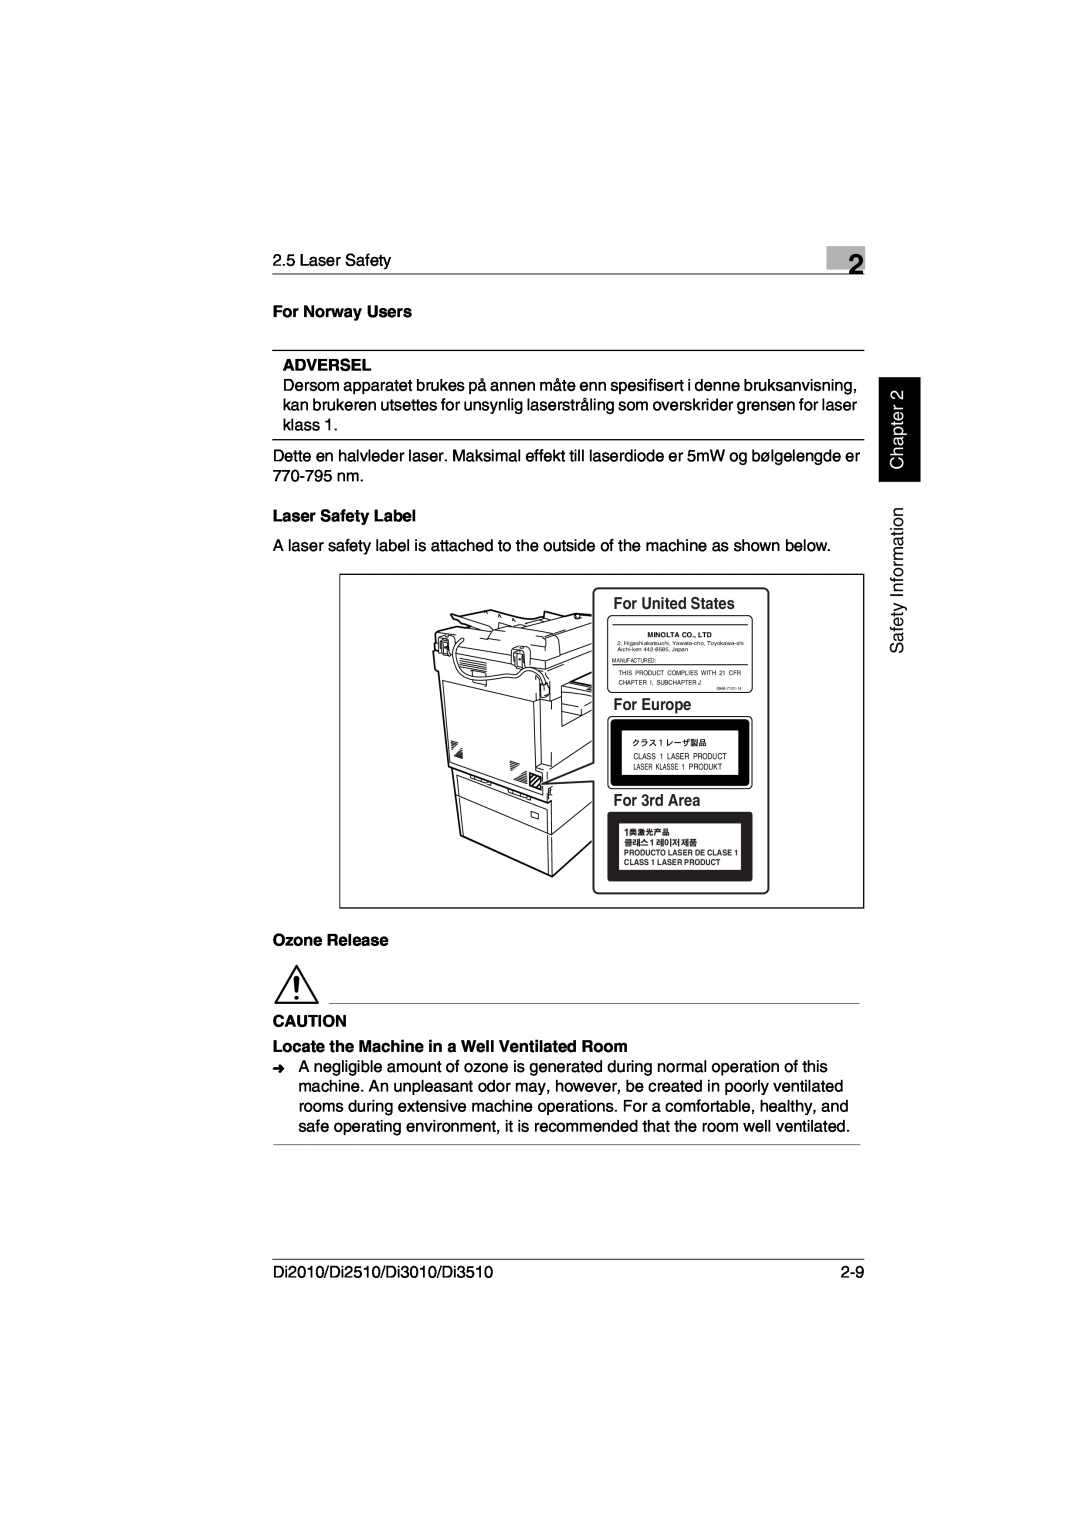 Minolta DI2510 Safety Information Chapter, For Norway Users, Adversel, Laser Safety Label, For United States, For Europe 